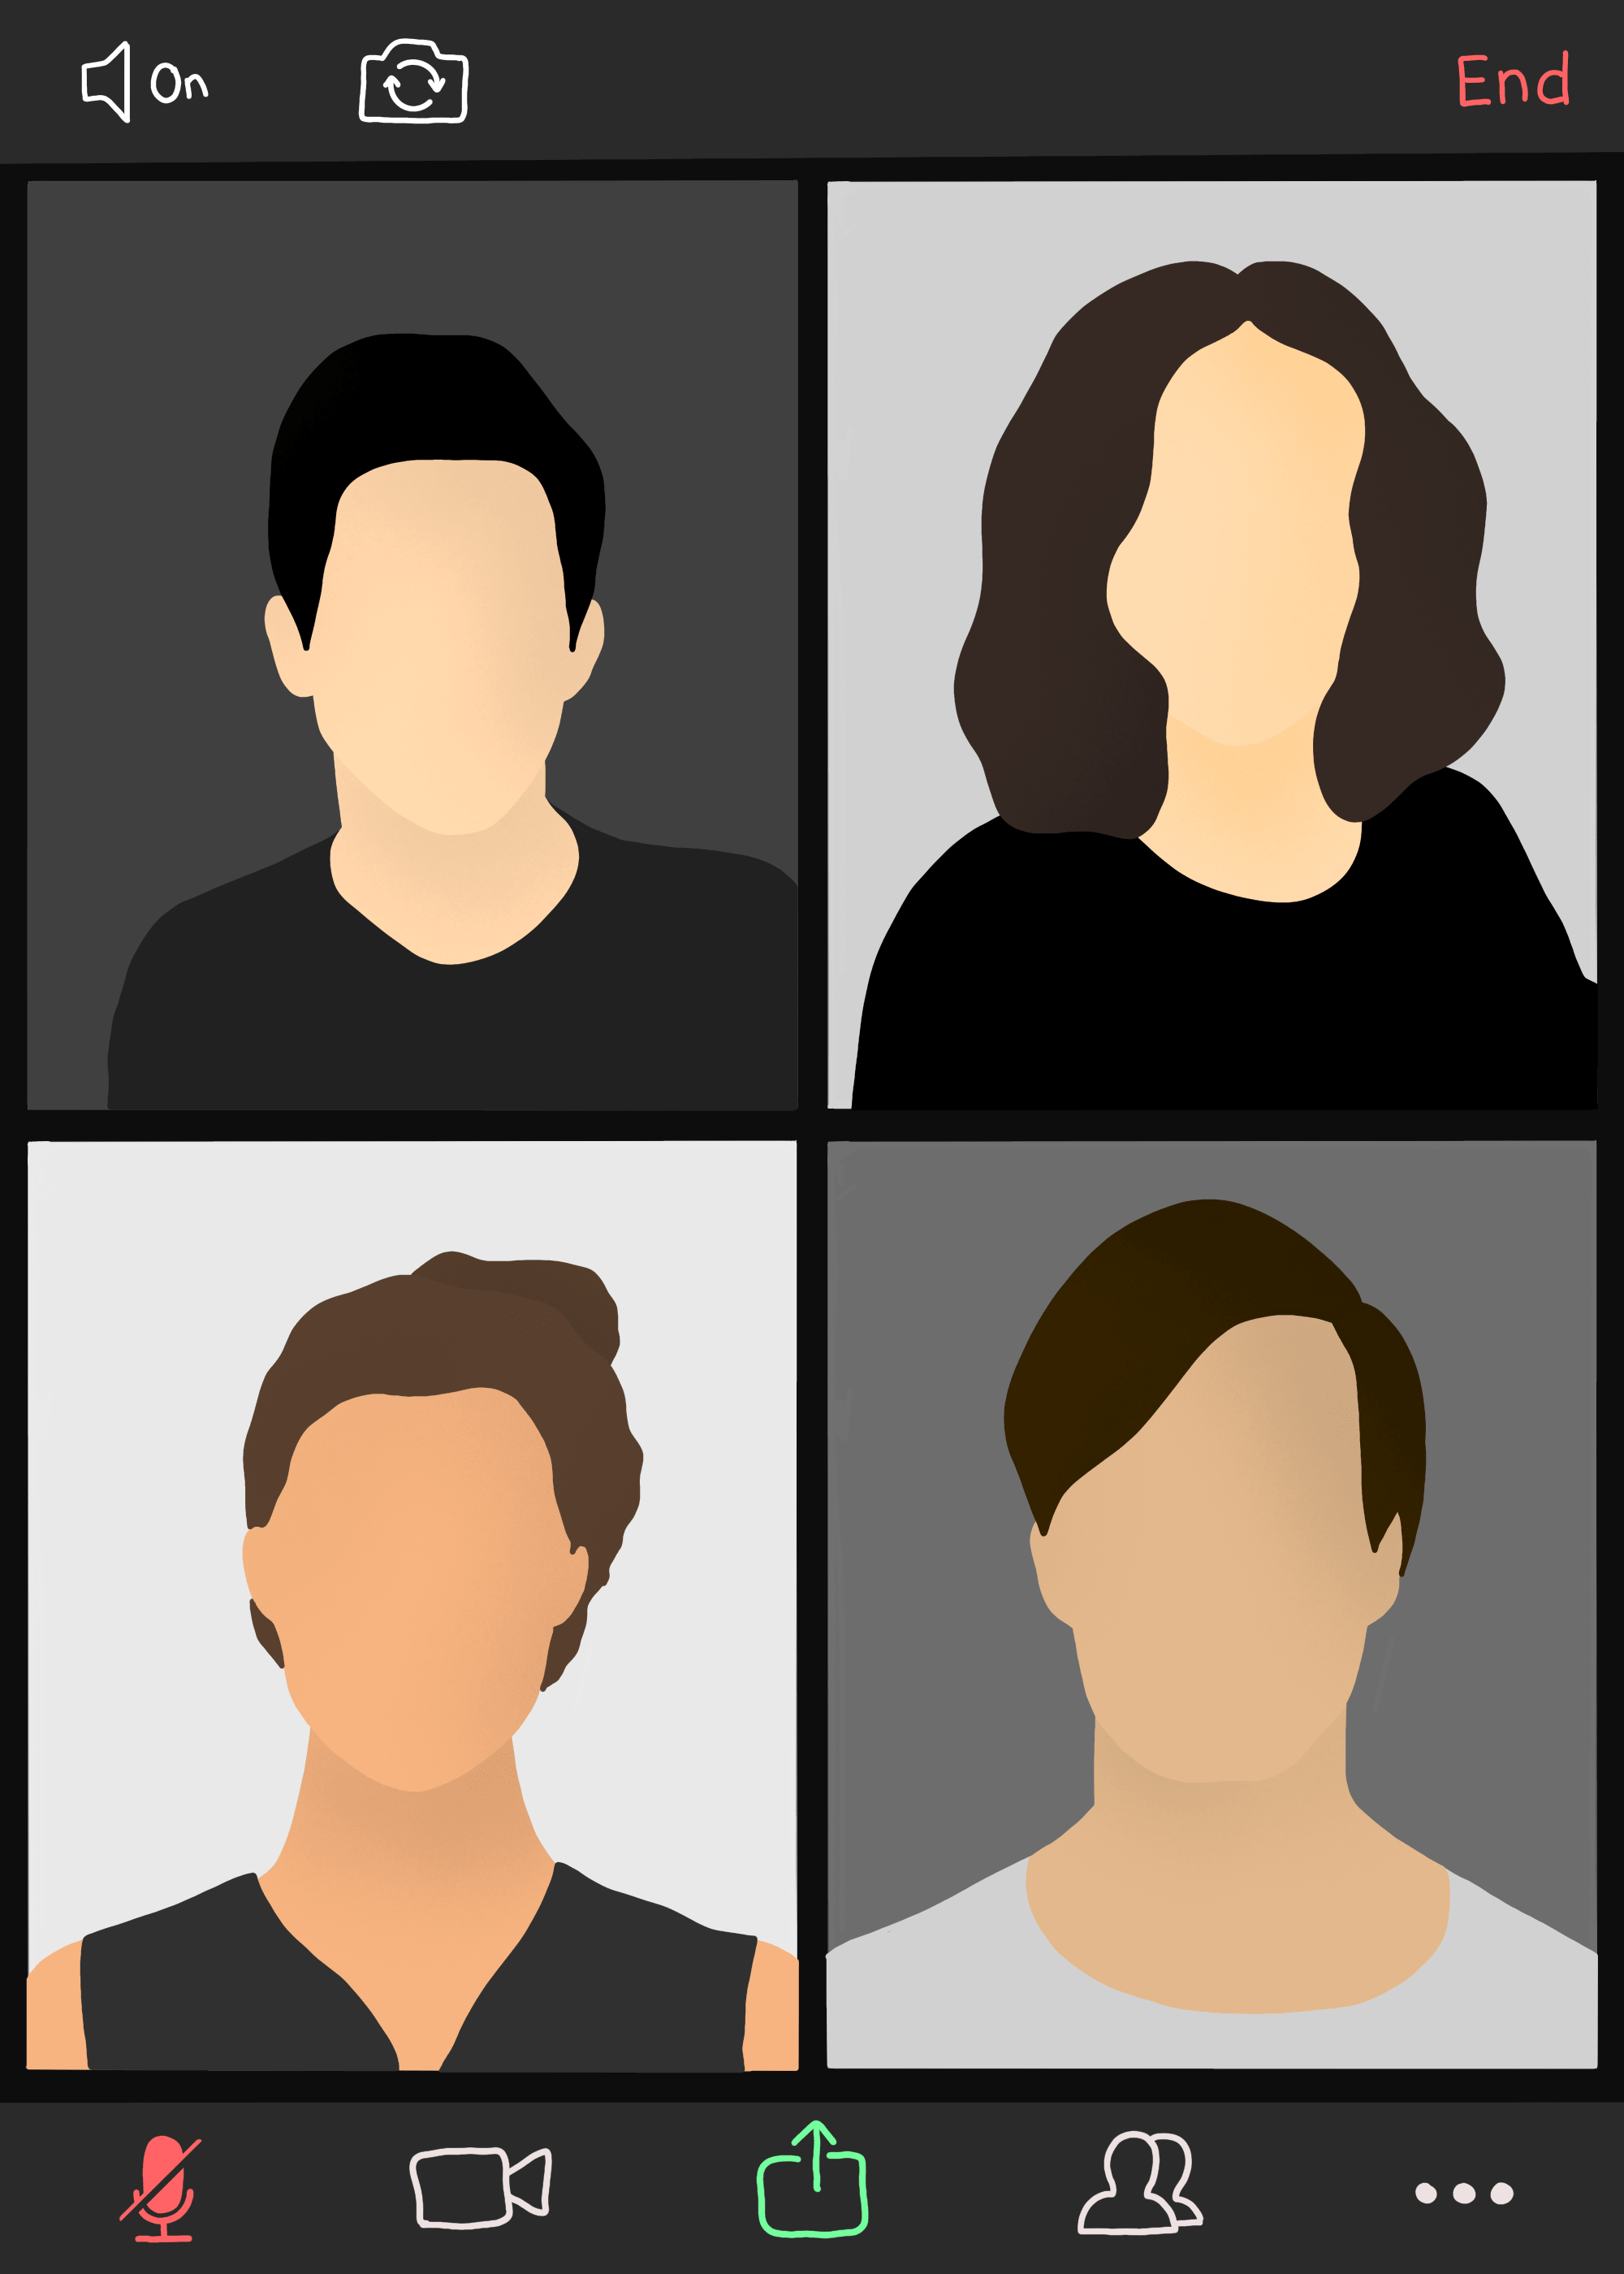 Illustrated heads from four different people in a video conference window.